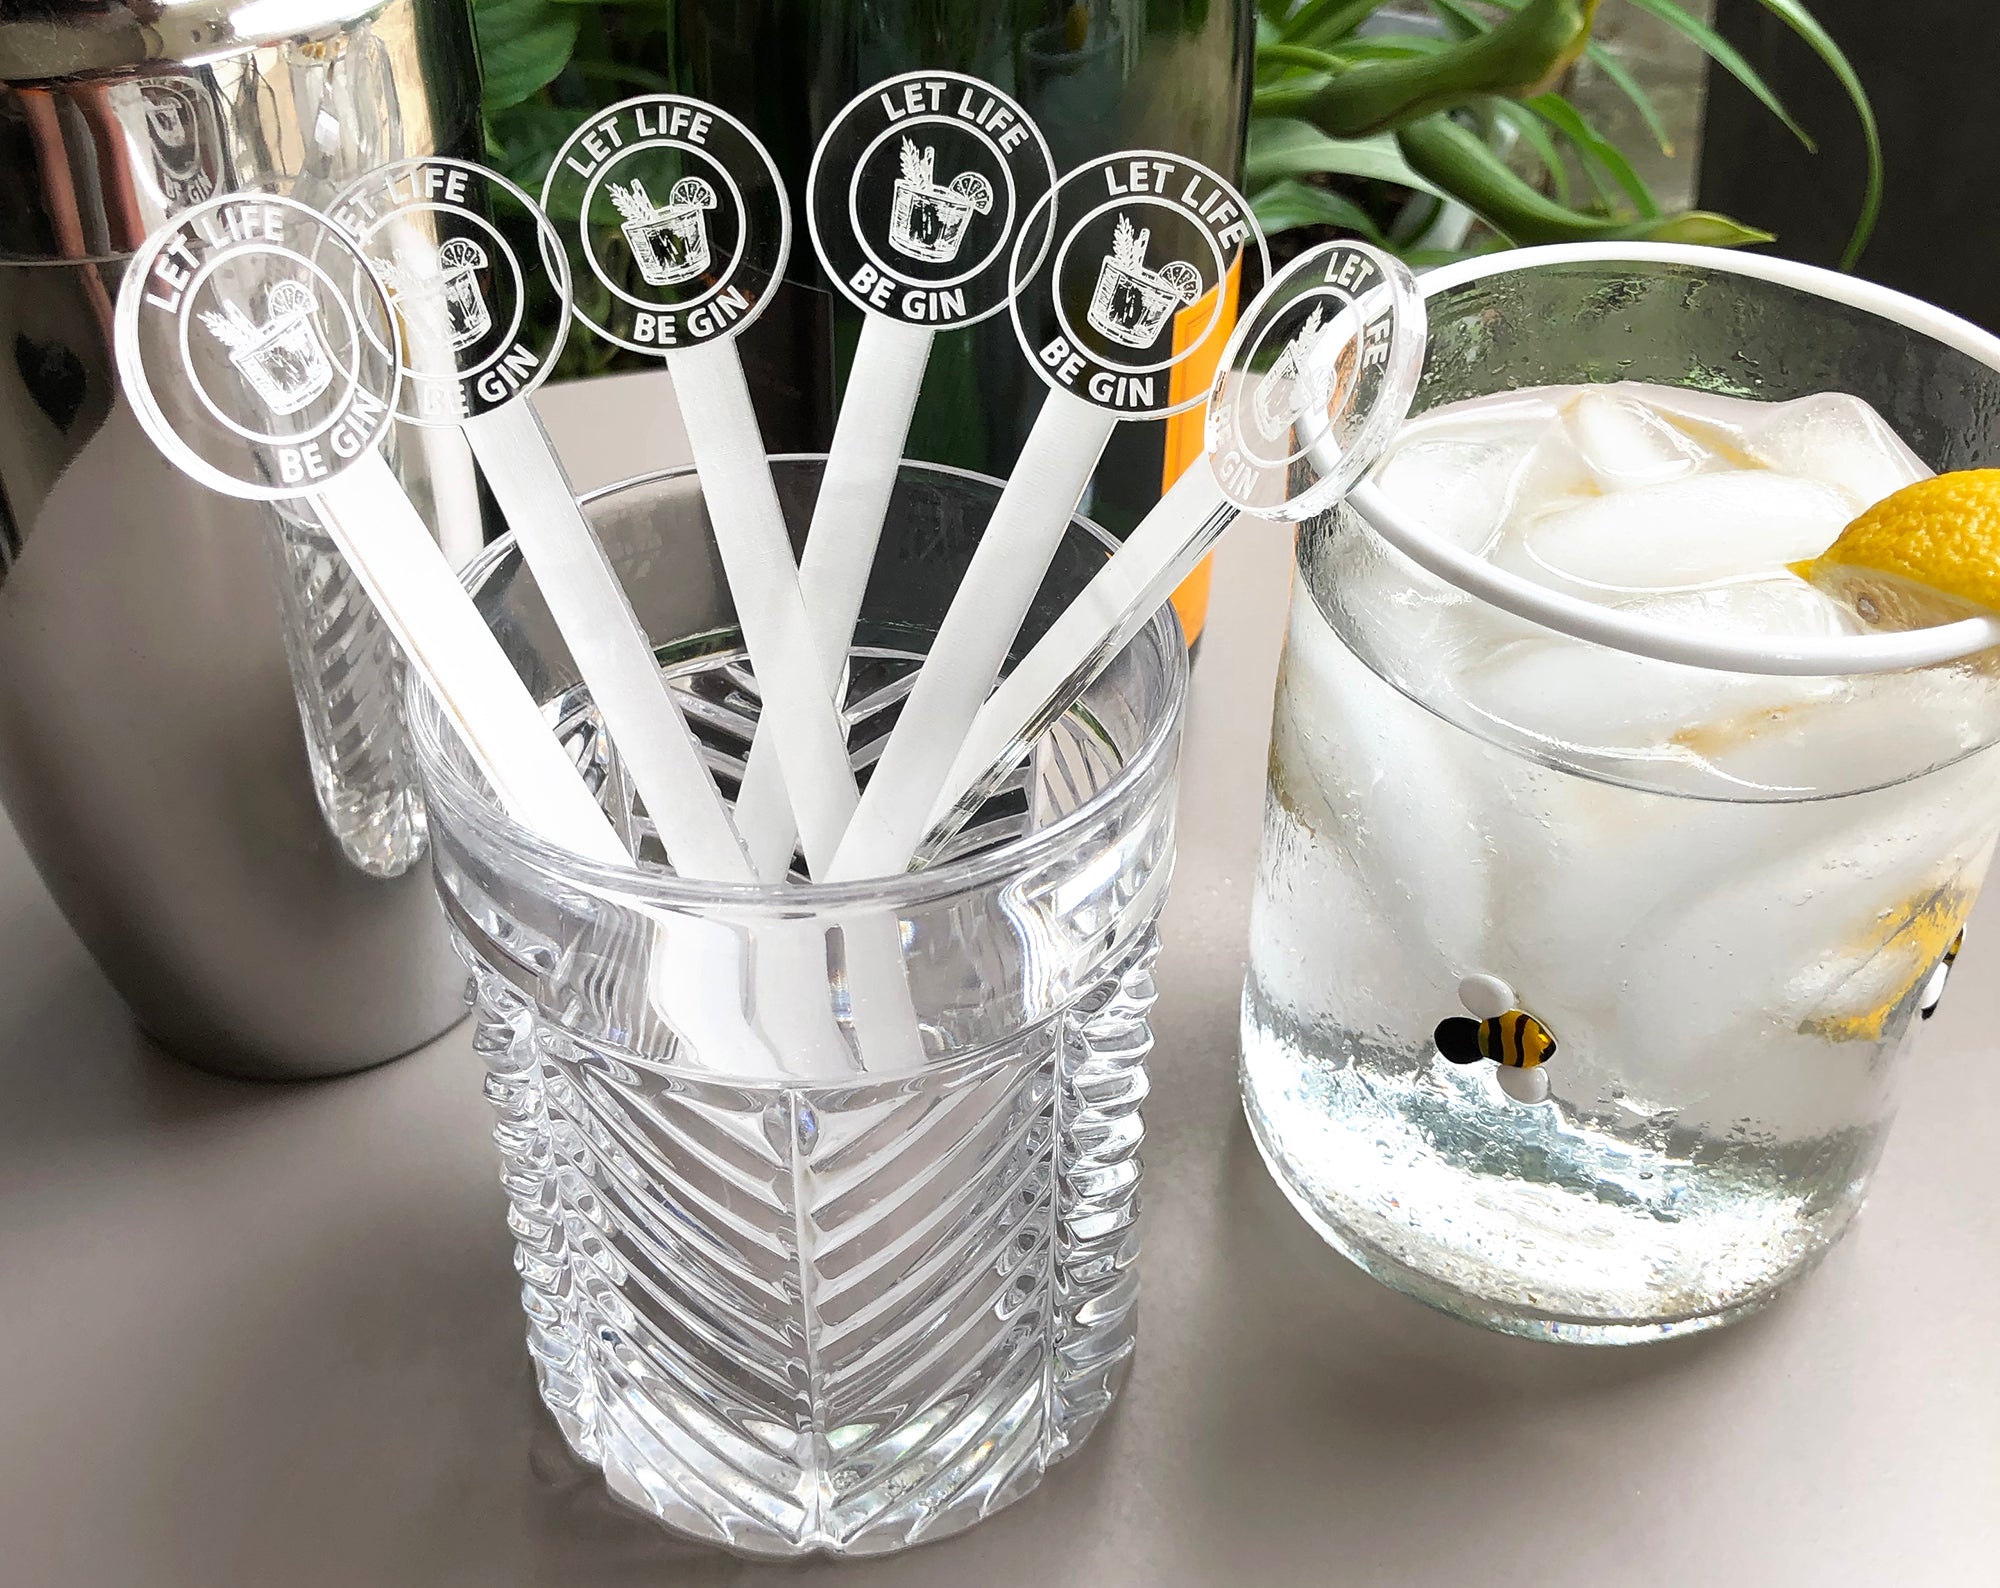 Let Life Be Gin Swizzle Sticks | Brit and Bee